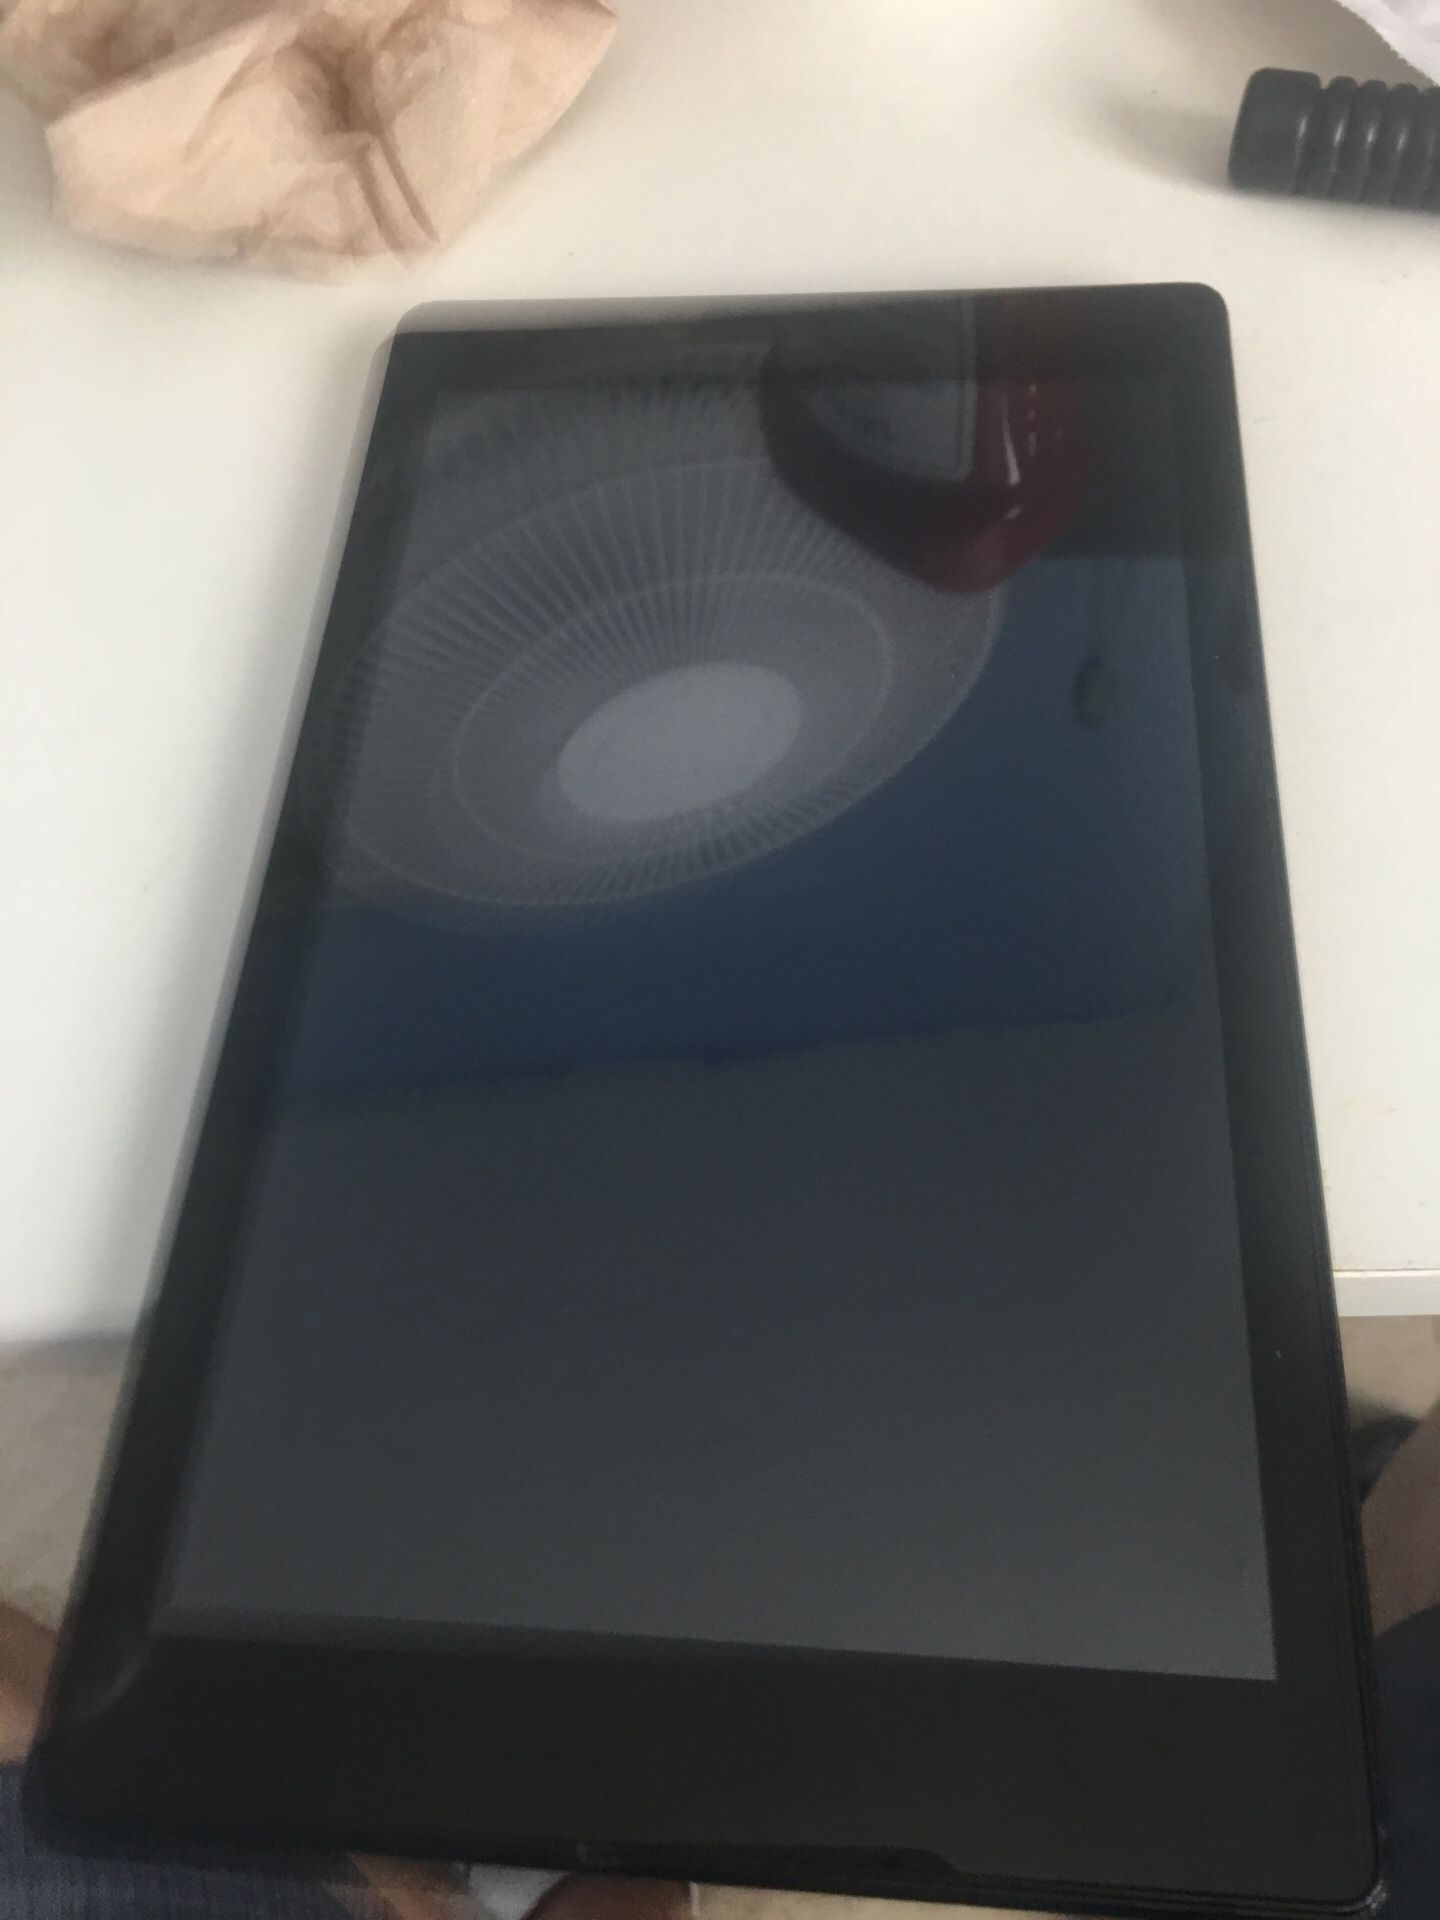 Amazon fire tablet $50 good condition